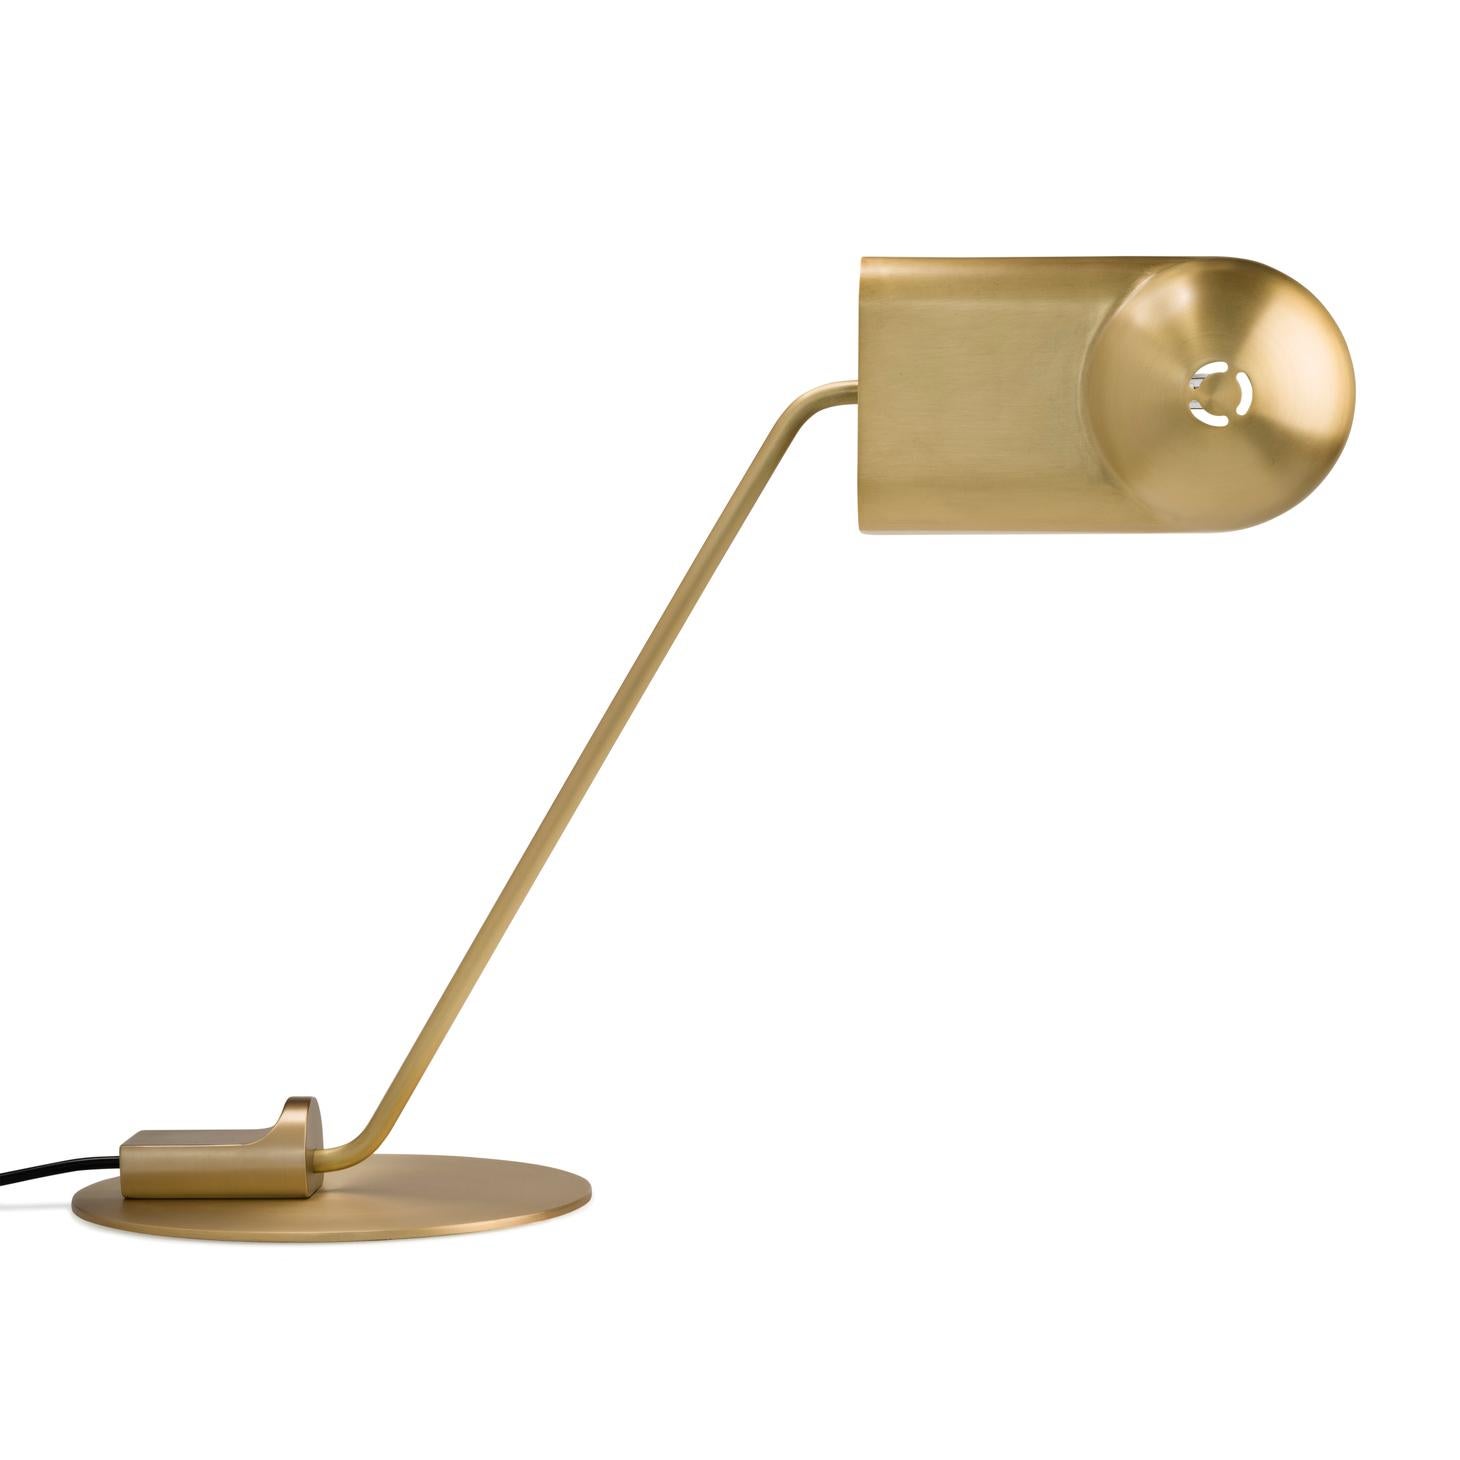 Table lamp designed by Joe Colombo in 1965.

The Domo lamp was originally designed by Italian designer Joe Colombo in 1965. Back then he designed three lamps based on the same core shape. Known for his democratic and functional design, his